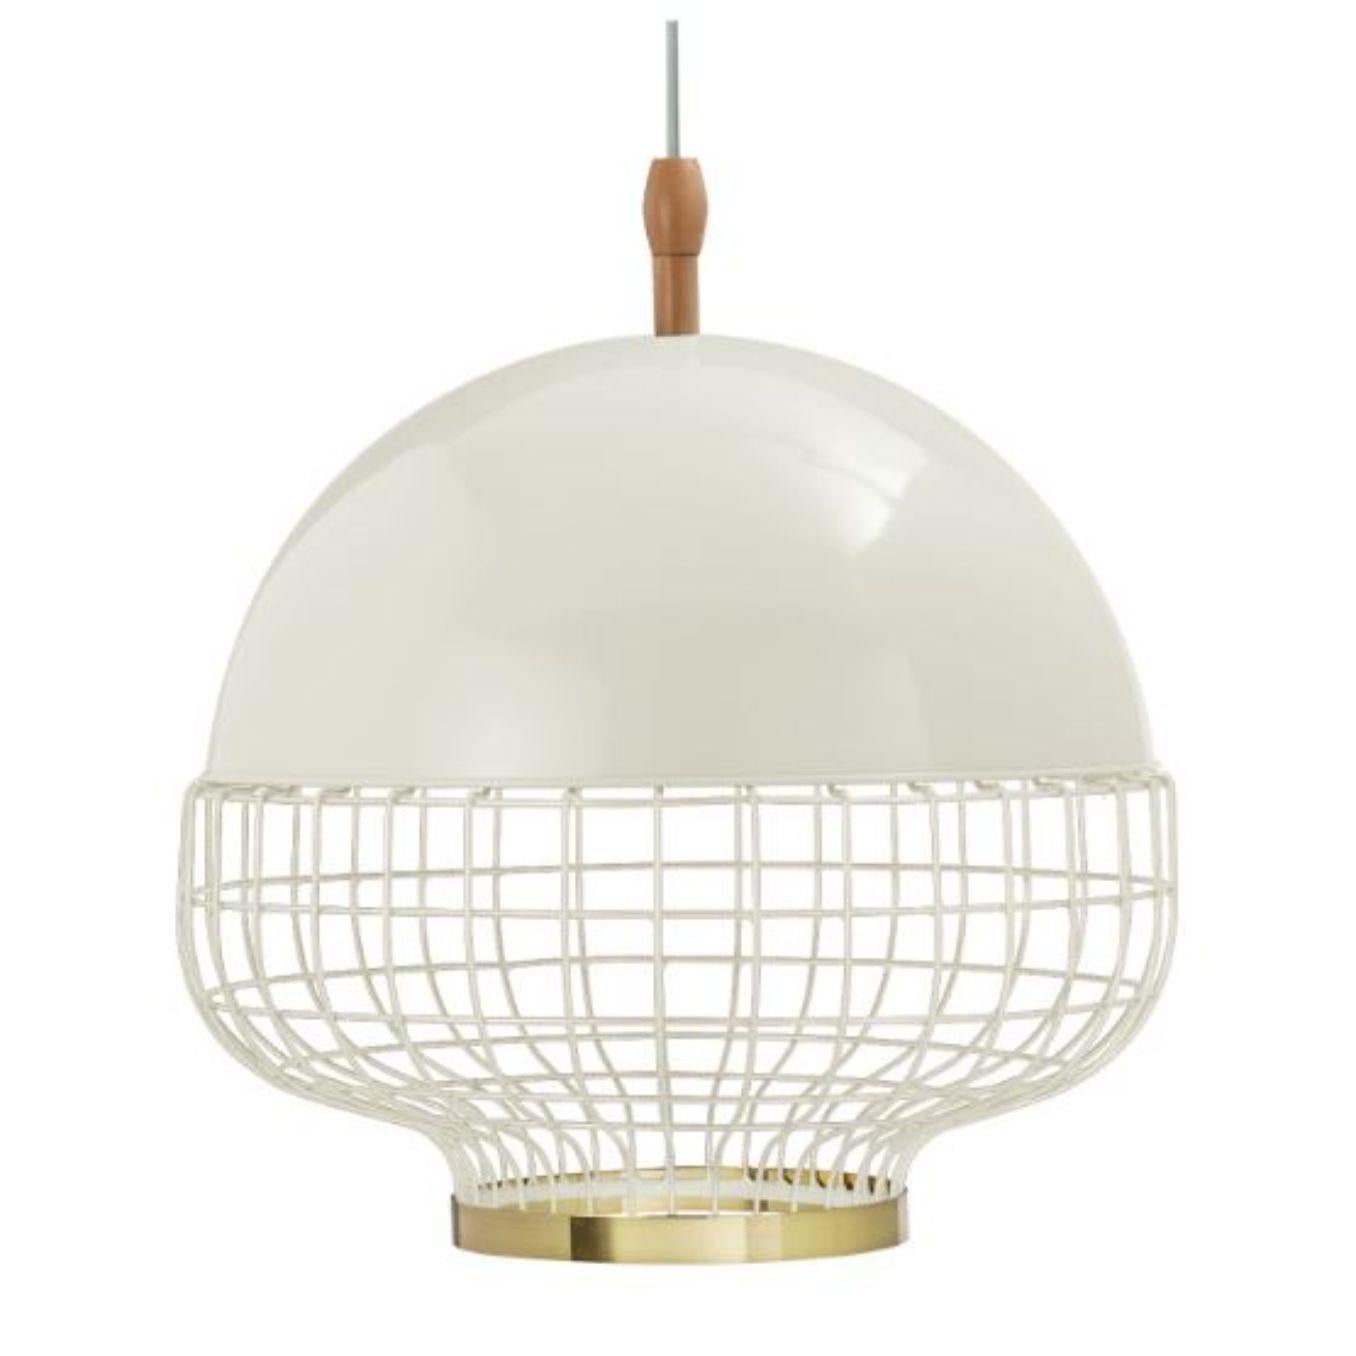 Ivory magnolia I suspension lamp with brass ring by Dooq.
Dimensions: W 65 x D 65 x H 57 cm.
Materials: lacquered metal, polished or brushed metal, brass.
Also available in different colours and materials. 

Information:
230V/50Hz
E27/1x20W